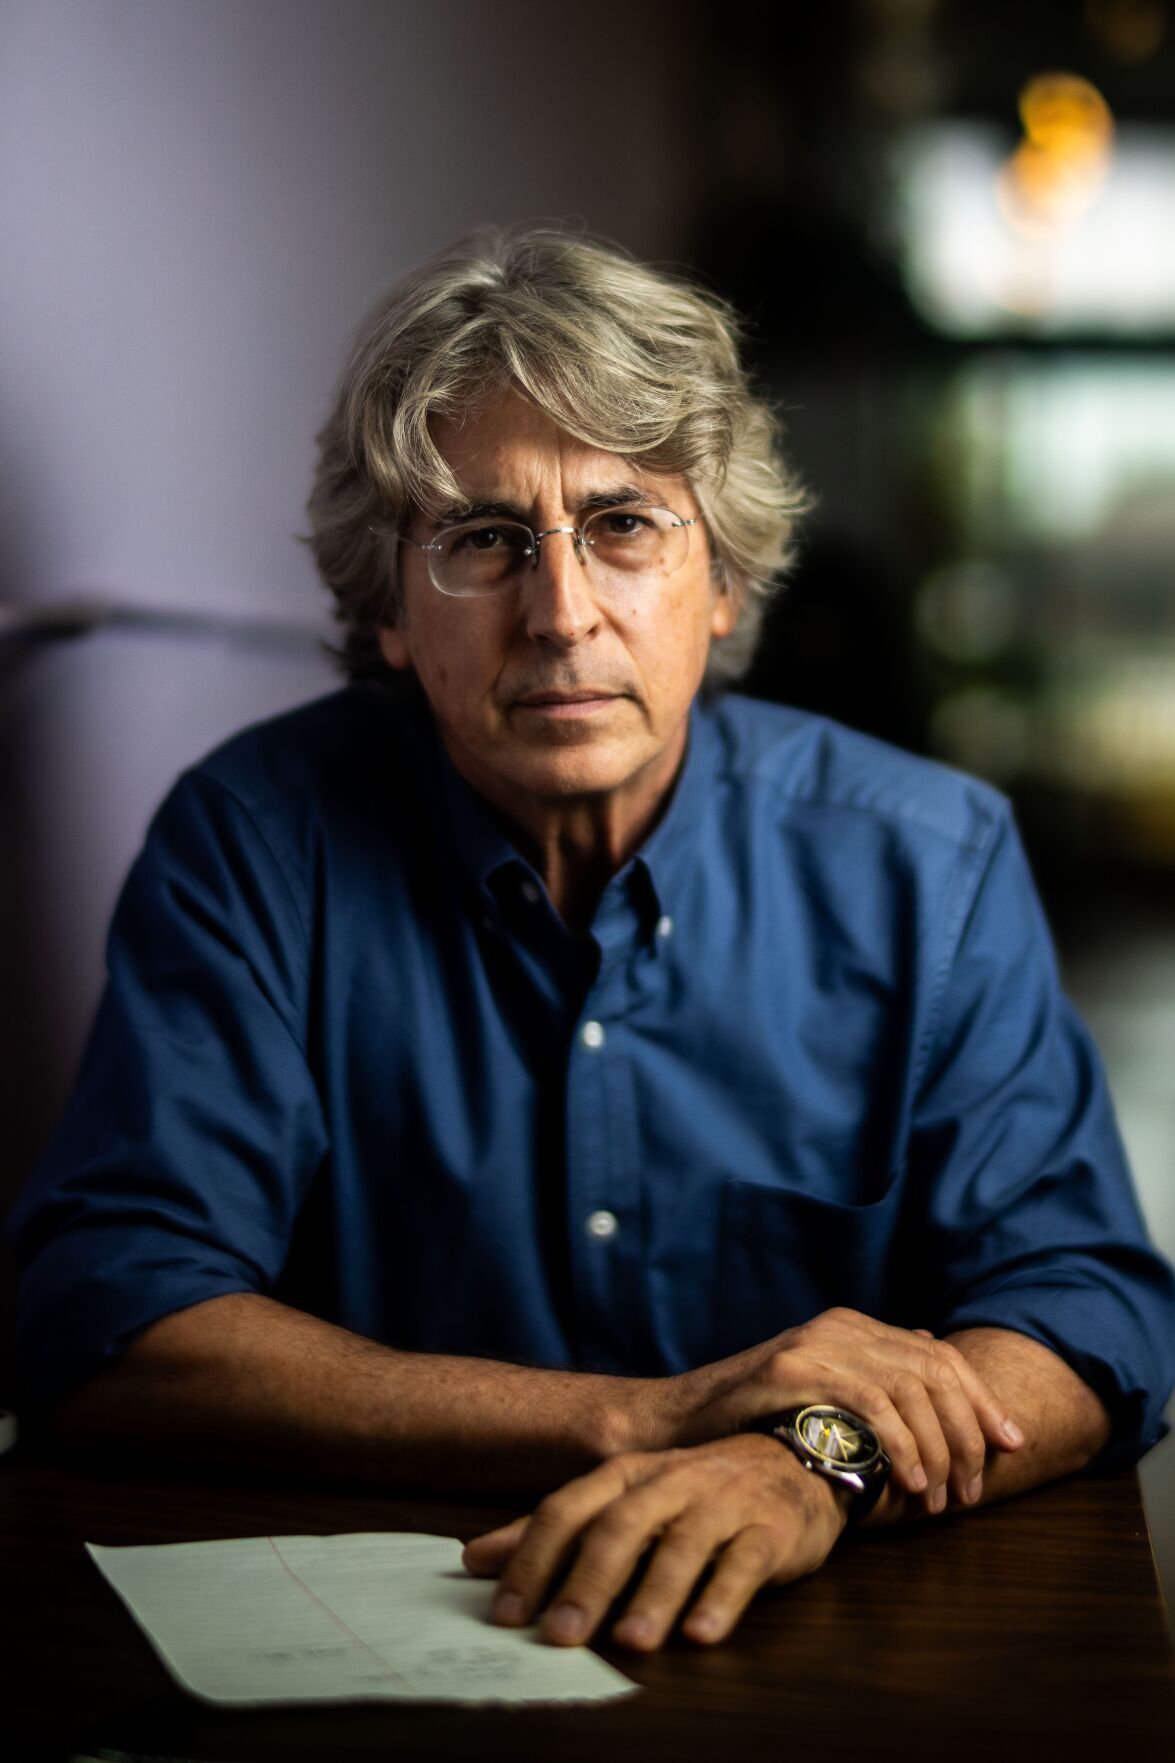 Alexander Payne and Gary Sanchez Productions Team on His Next Film